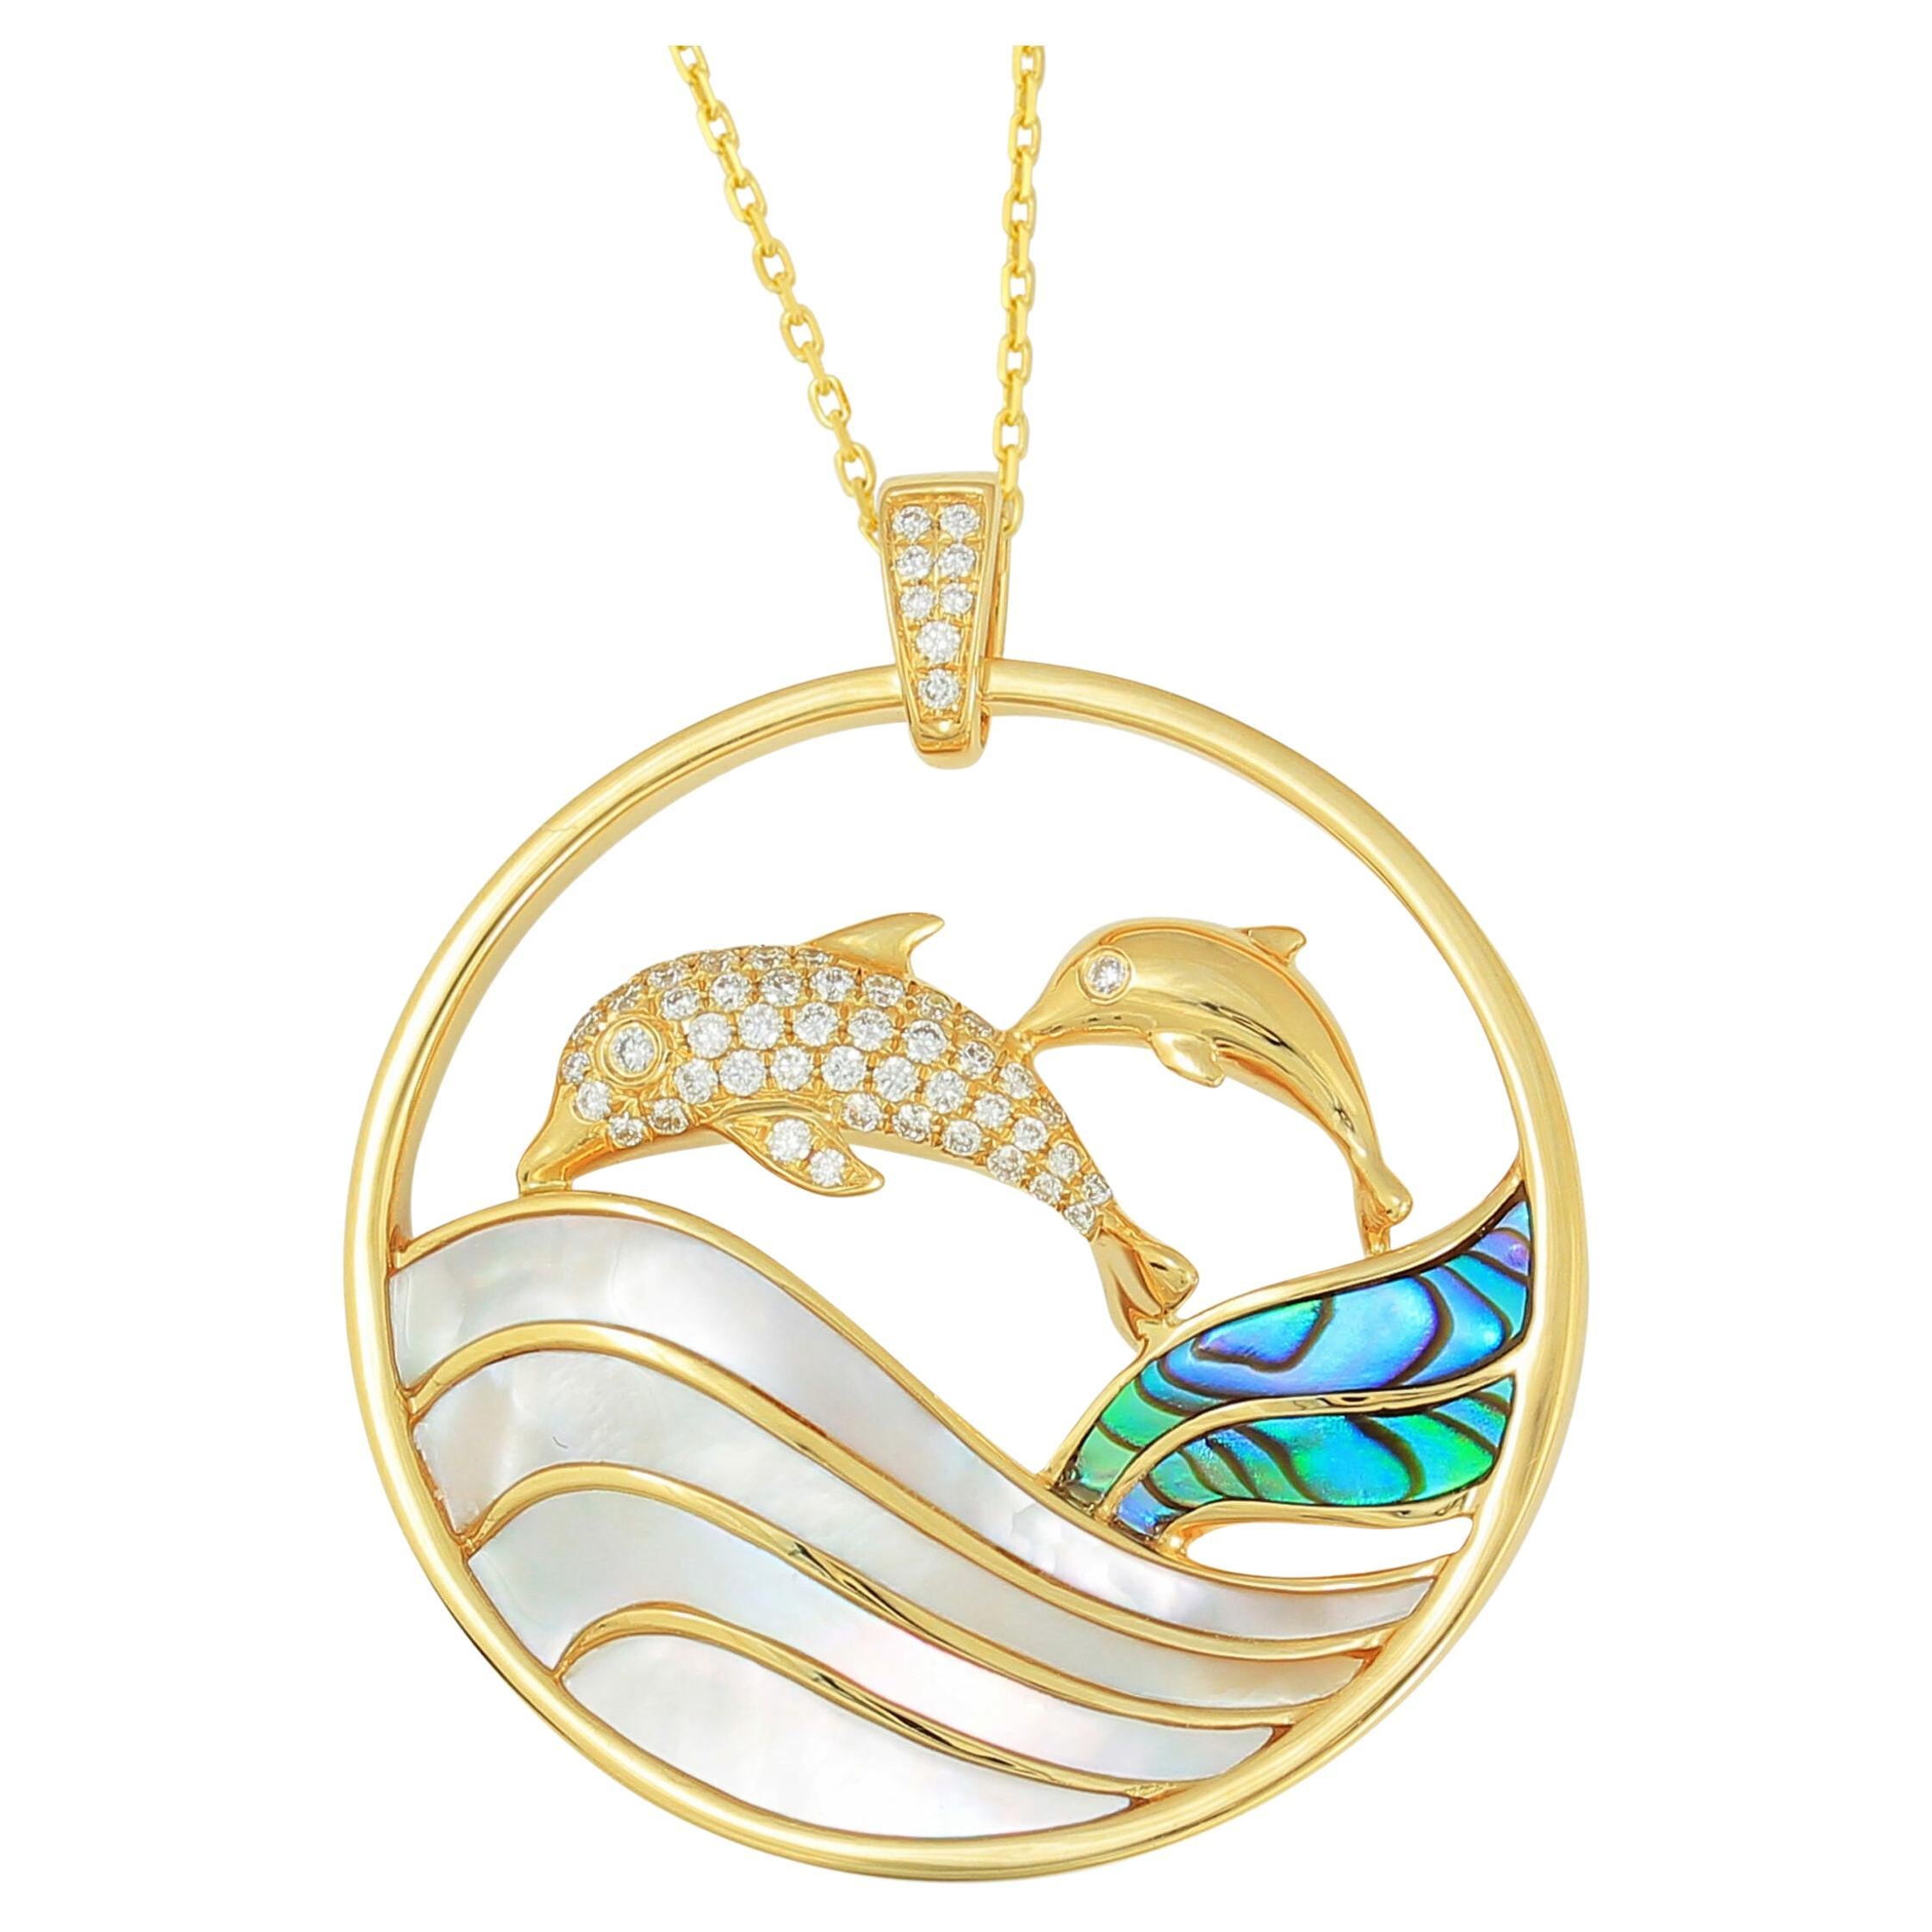 Frederic Sage Large “Dolphin” Pendant